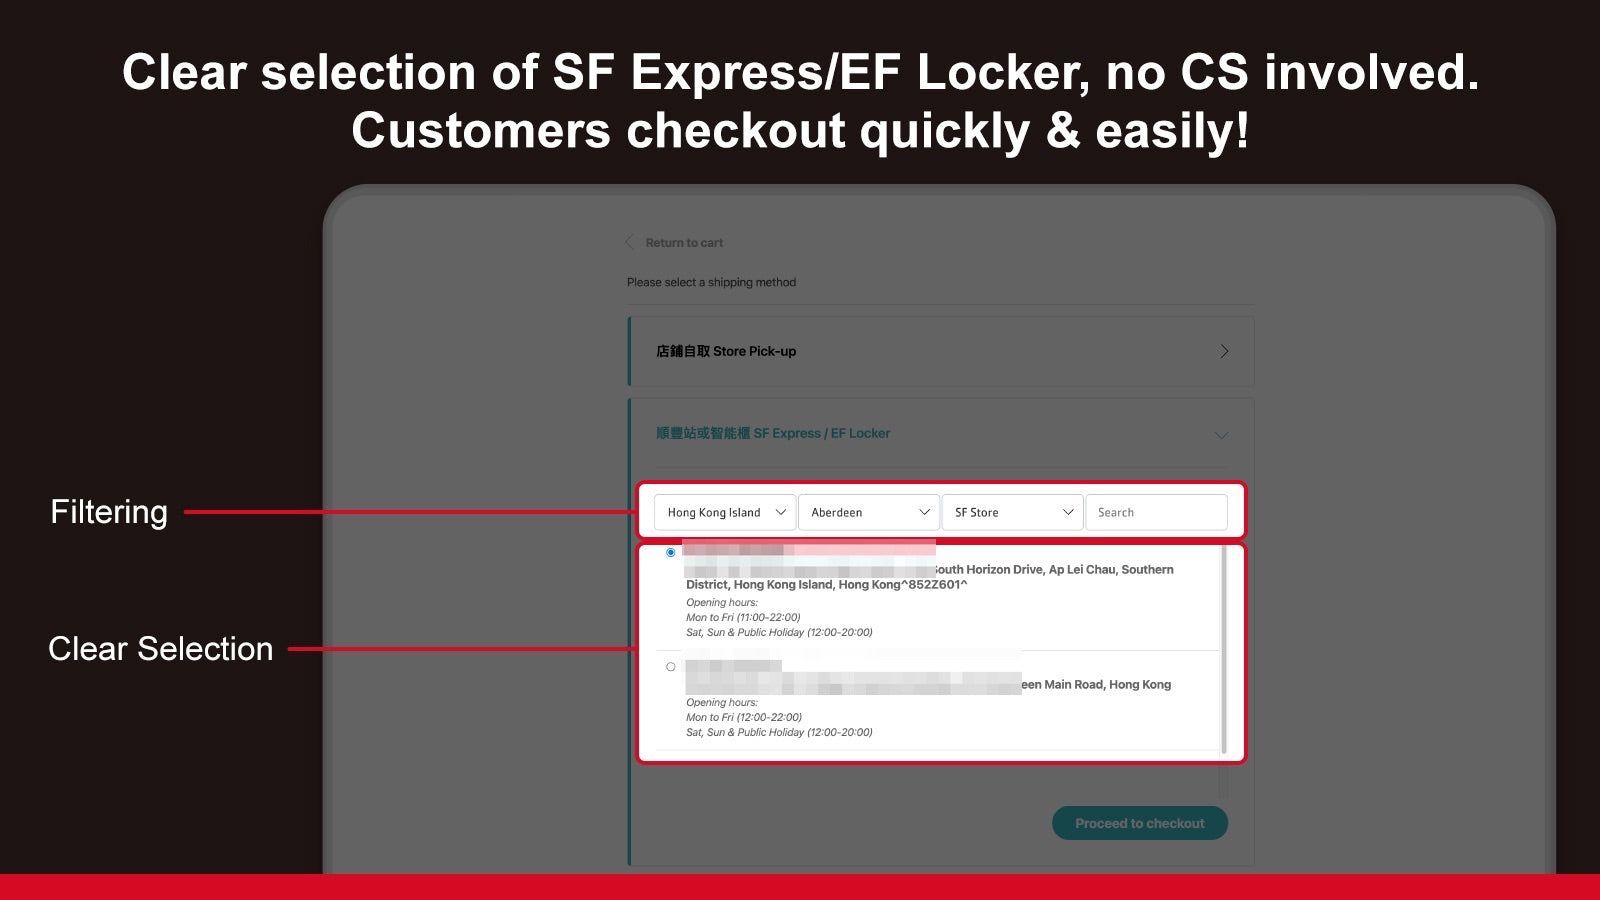 Let customers select sf express places as pickup location